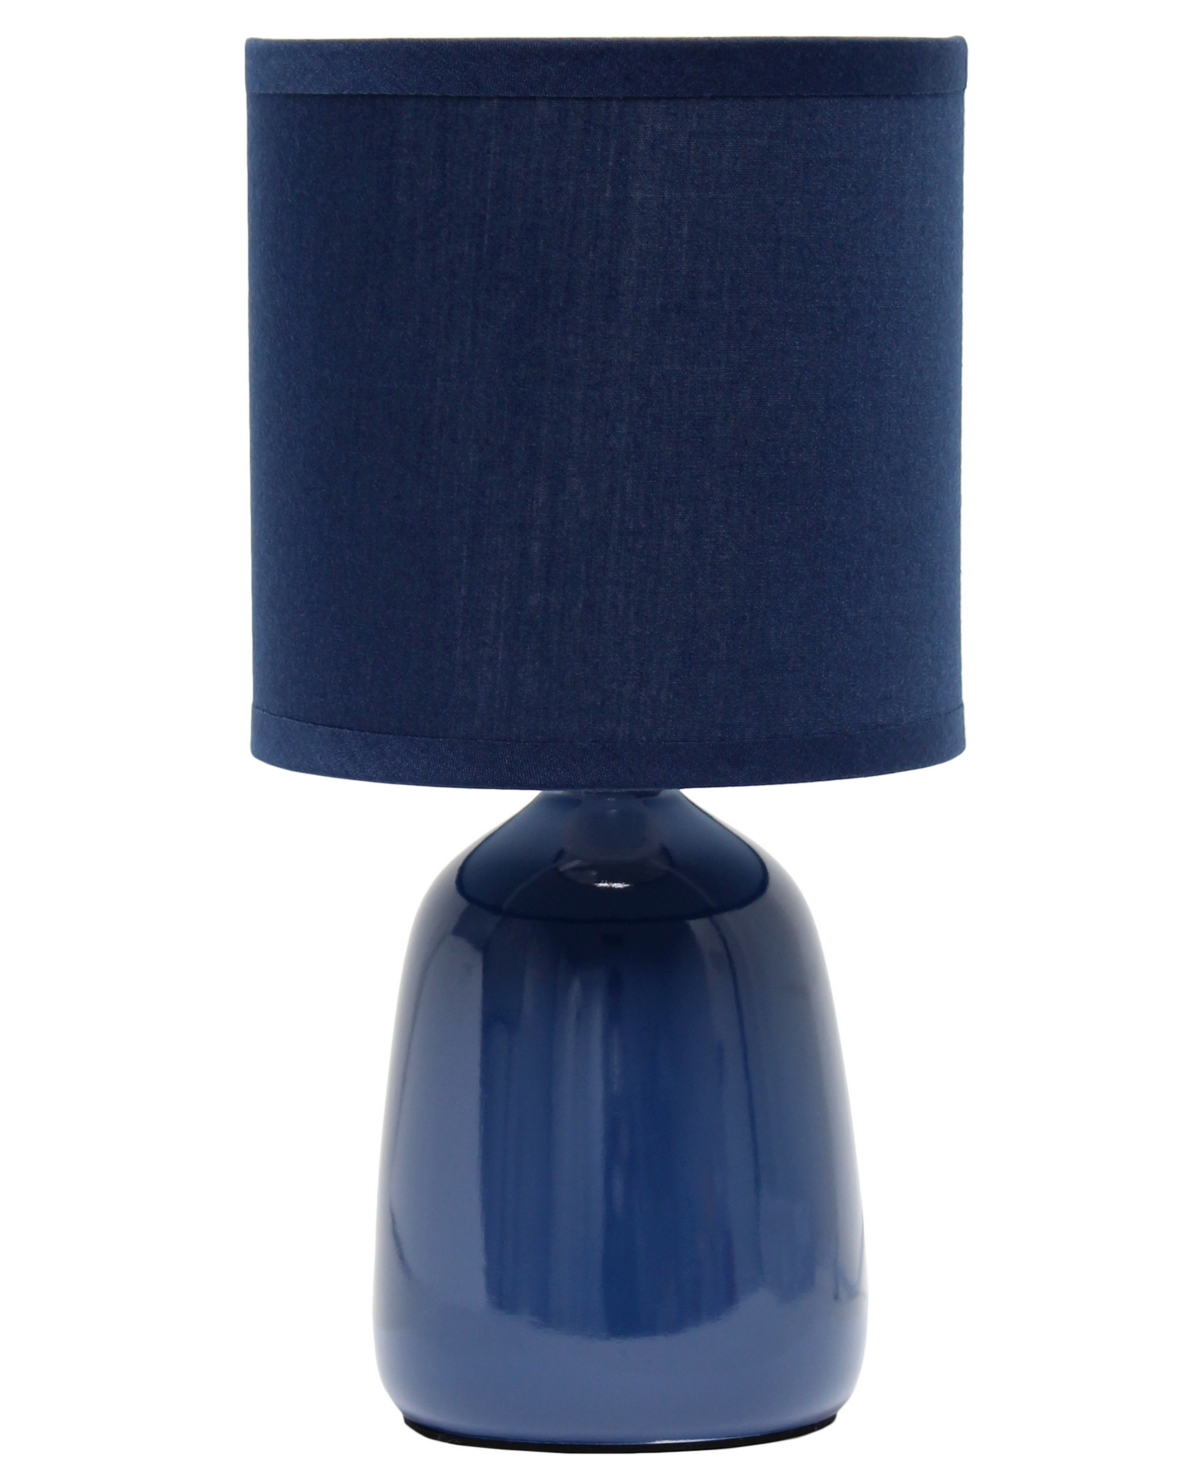 Shop Simple Designs 10.04" Tall Traditional Ceramic Thimble Base Bedside Table Desk Lamp With Matching Fabric Shade In Navy Blue